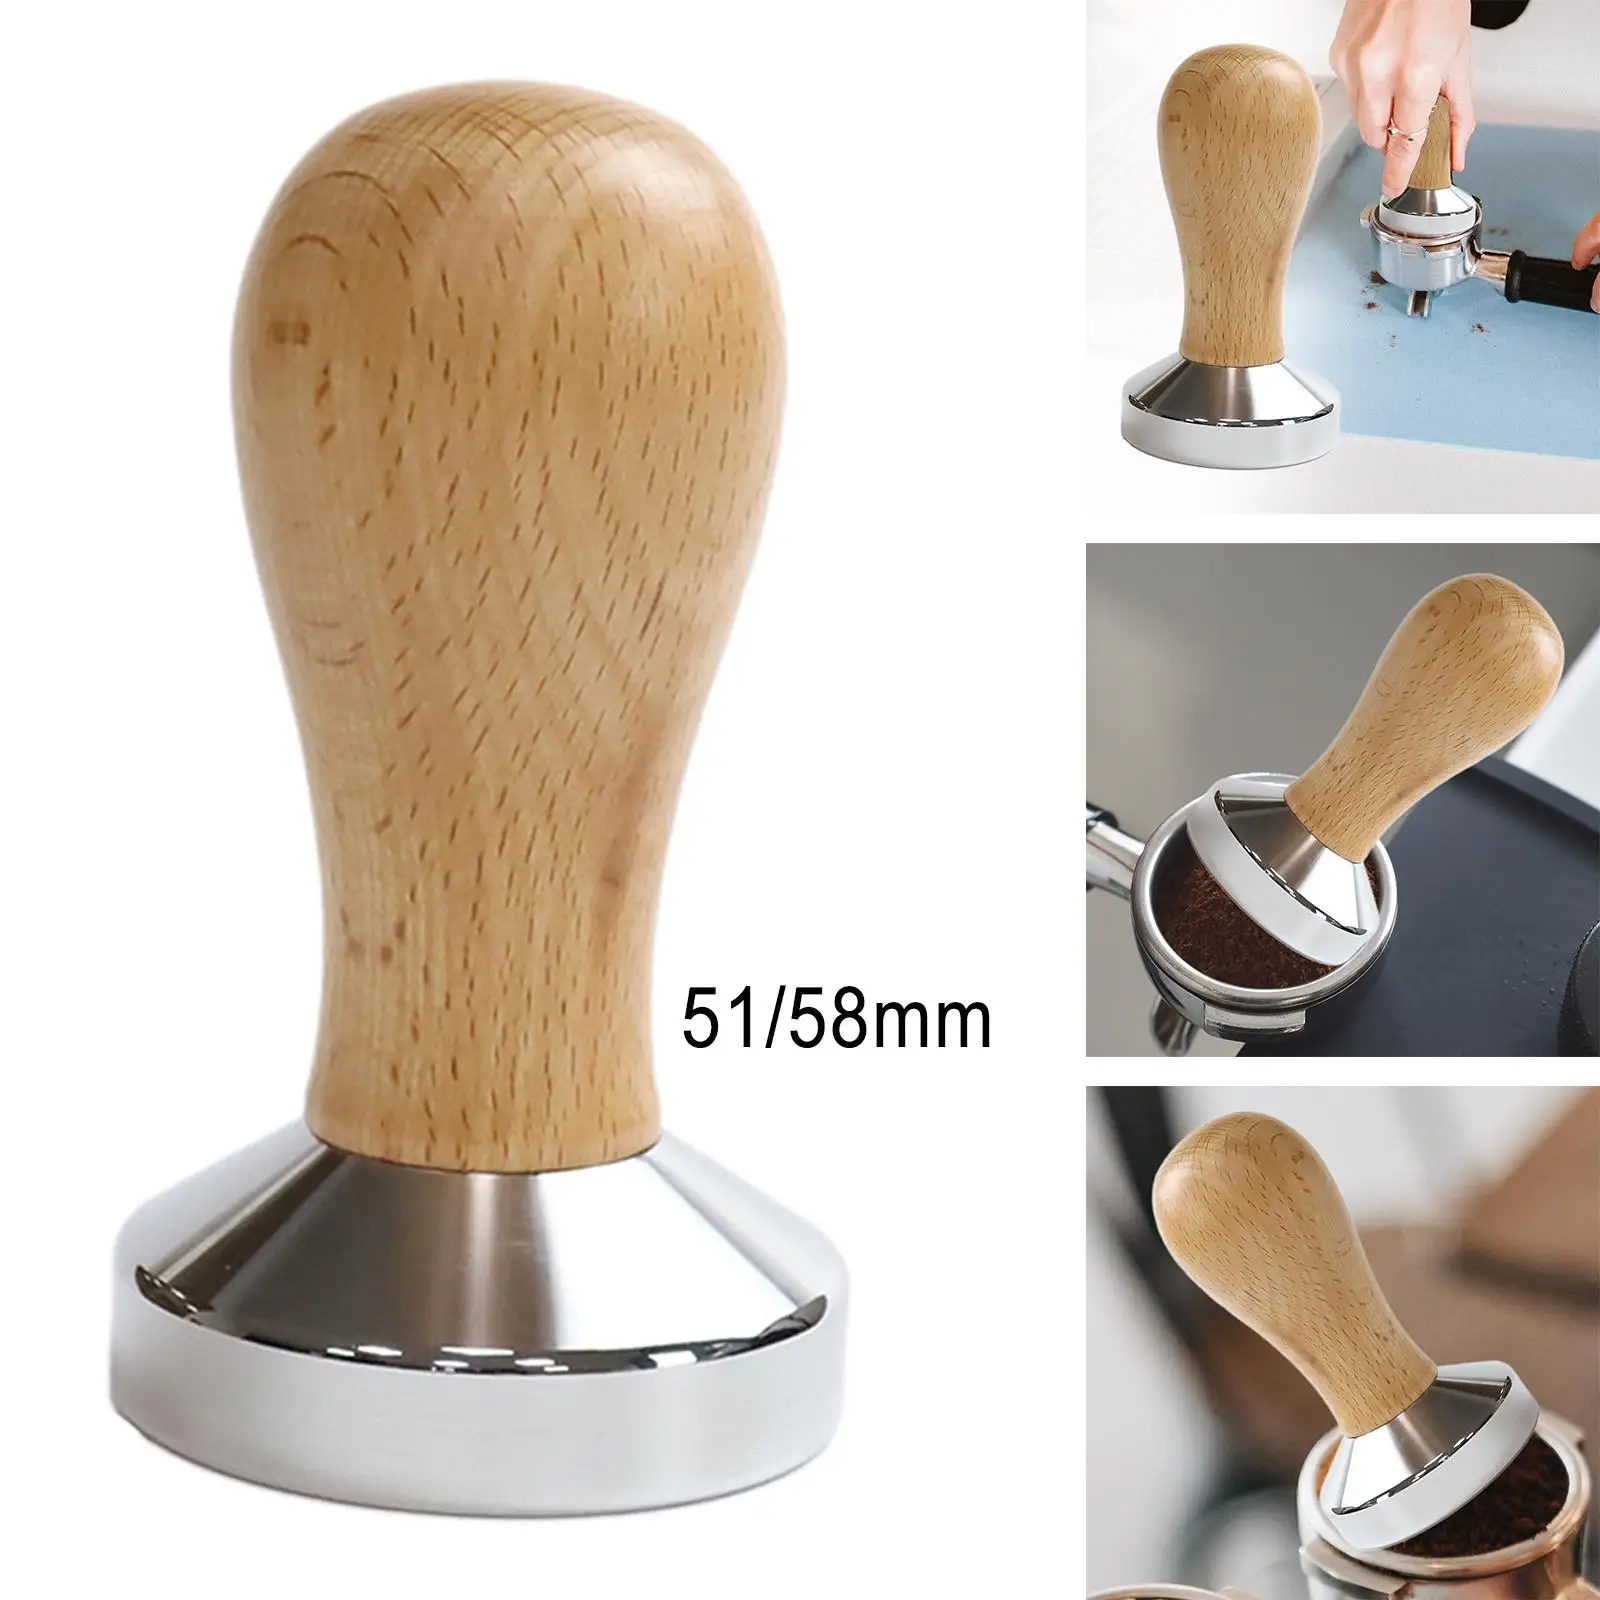 Professional Coffee Tamper Wooden Handle Calibrated Powder Hammer Leveler Powder Distributor for Coffee Machine Cafe